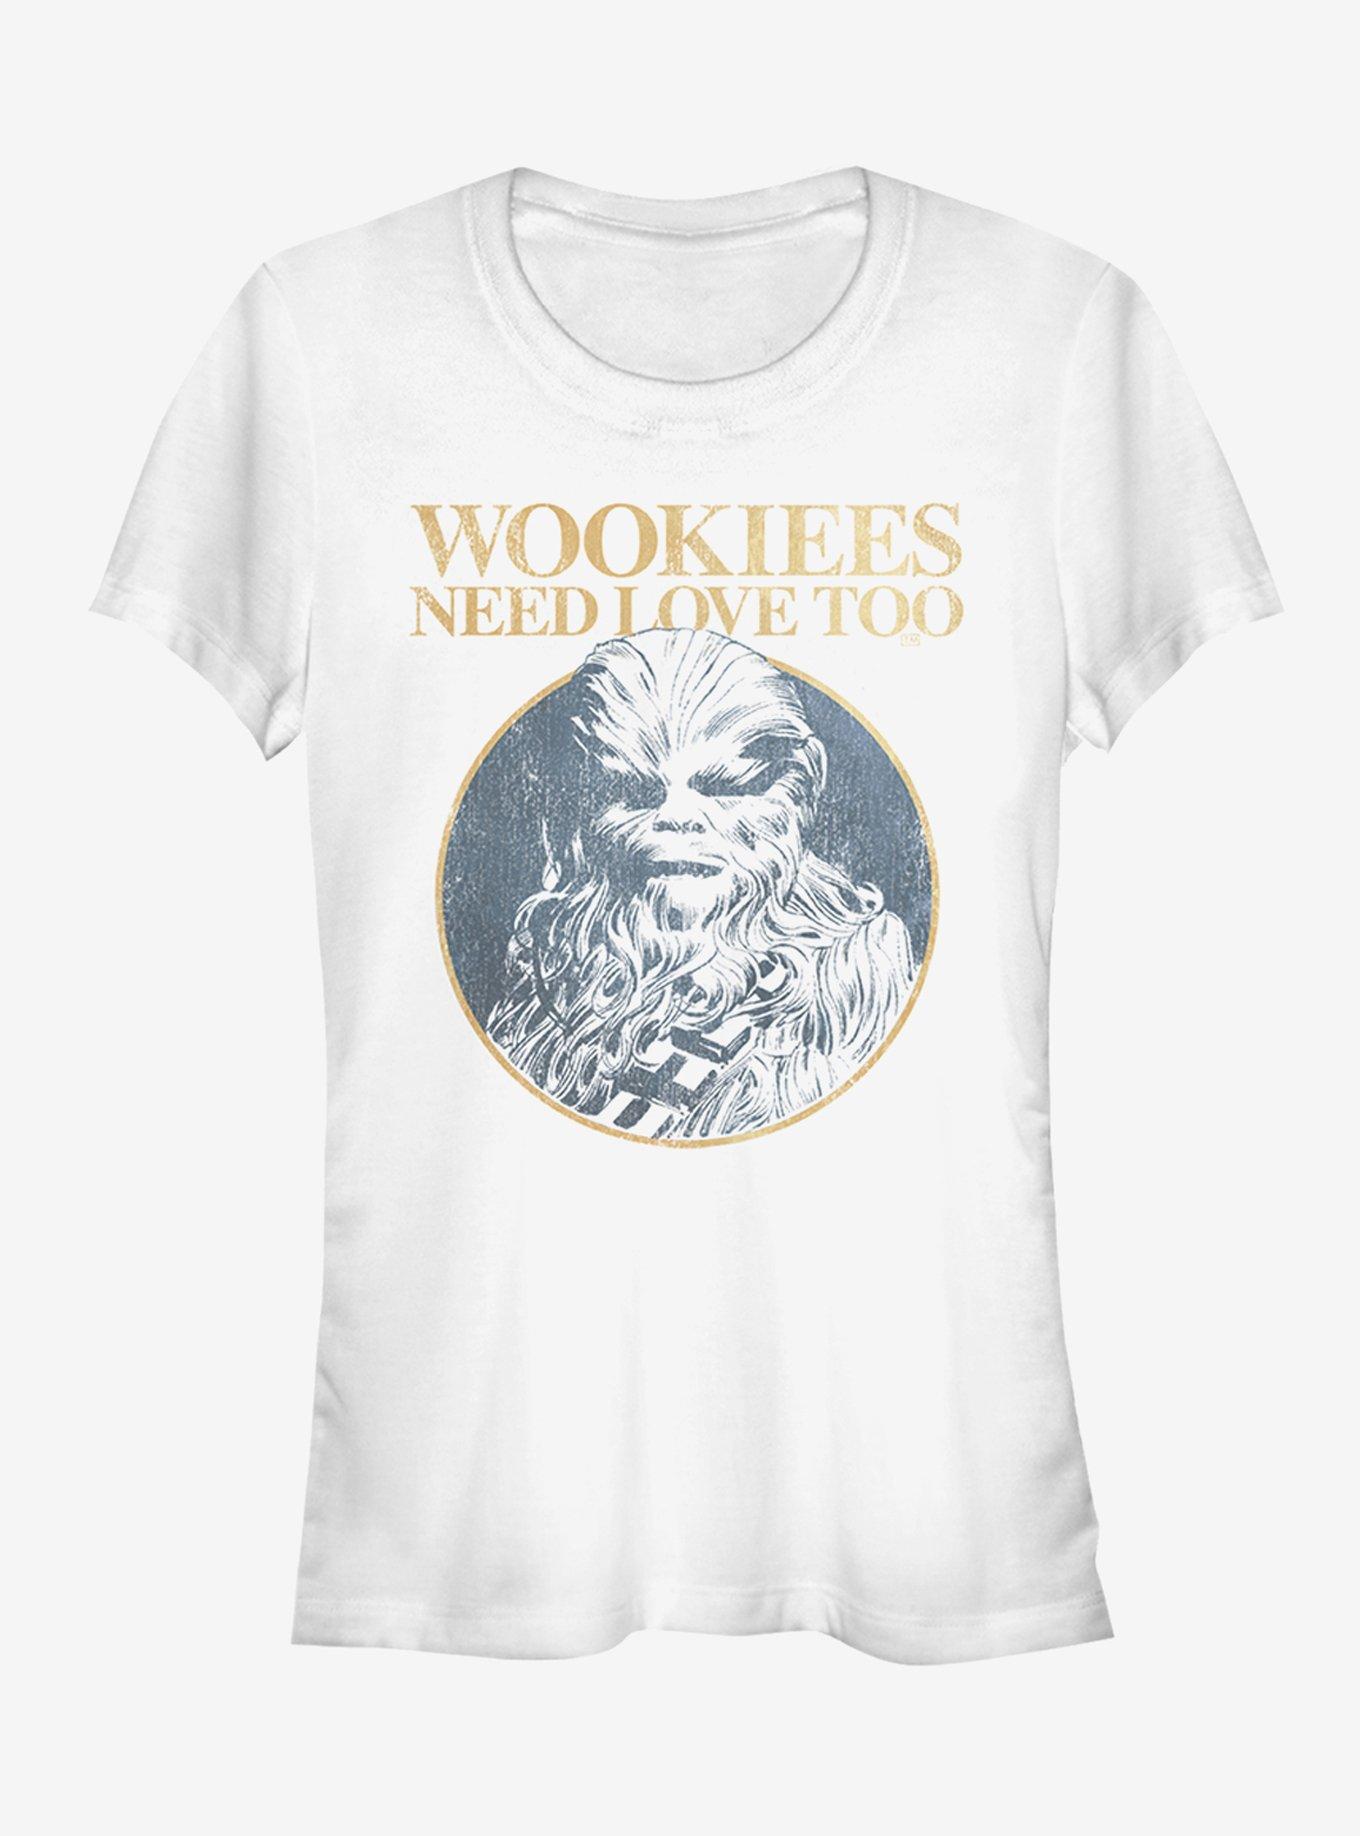 Star Wars Valentine's Day Wookiees Need Love Too Girls T-Shirt, WHITE, hi-res